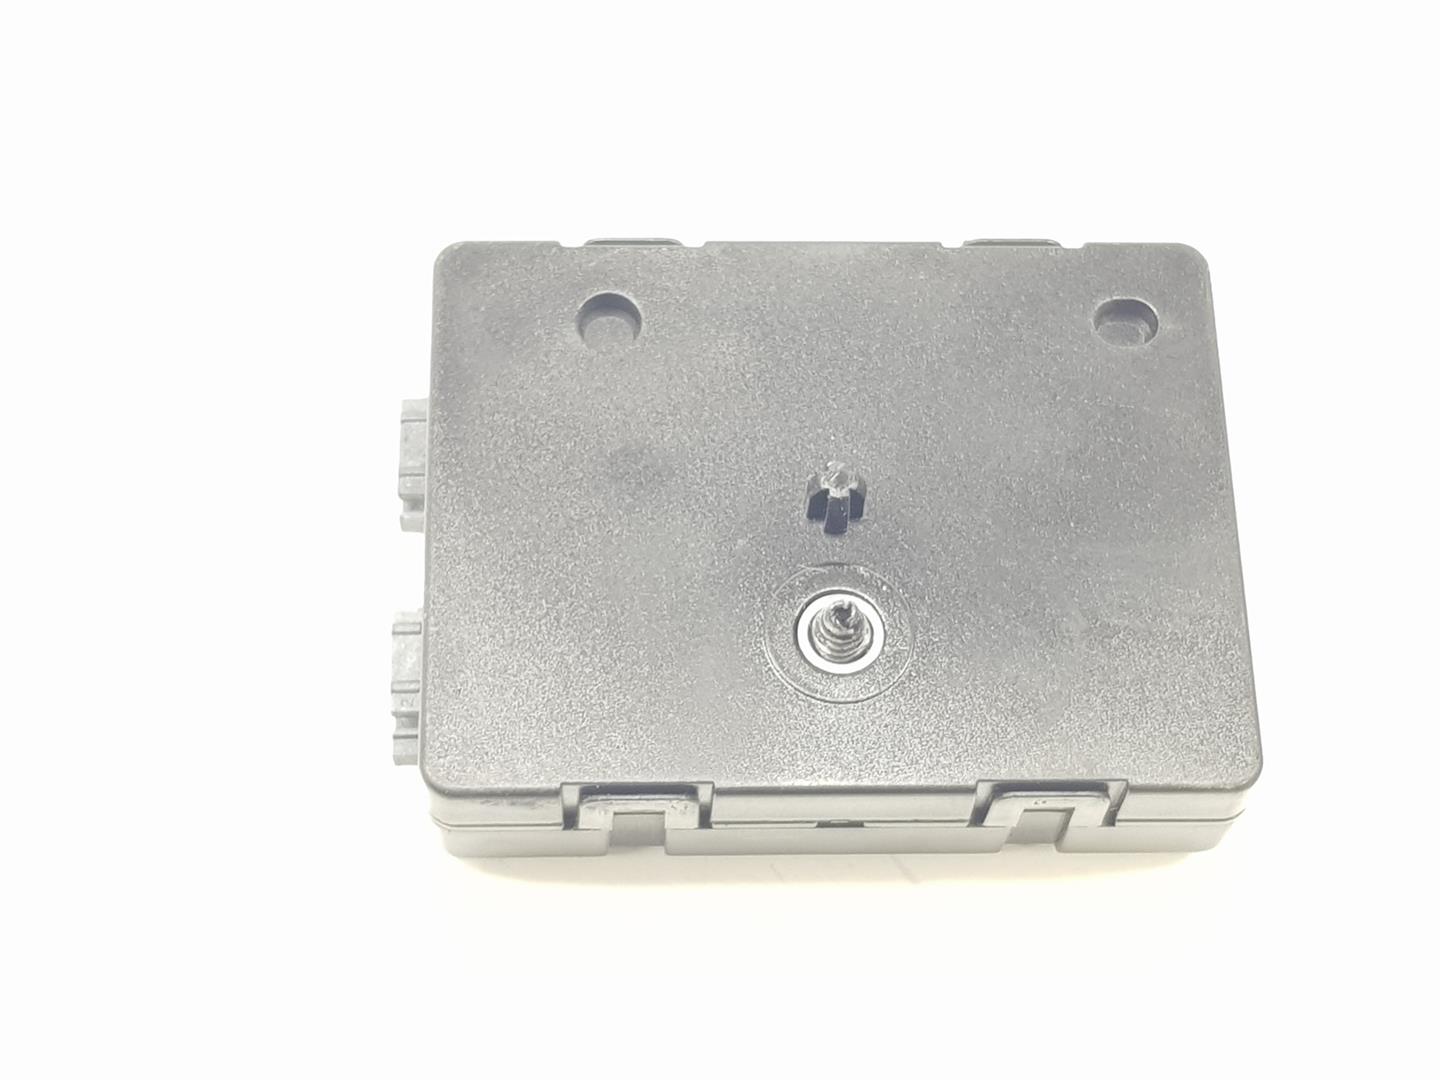 BMW X1 E84 (2009-2015) Other Control Units 9181454, 65209181454 23894786